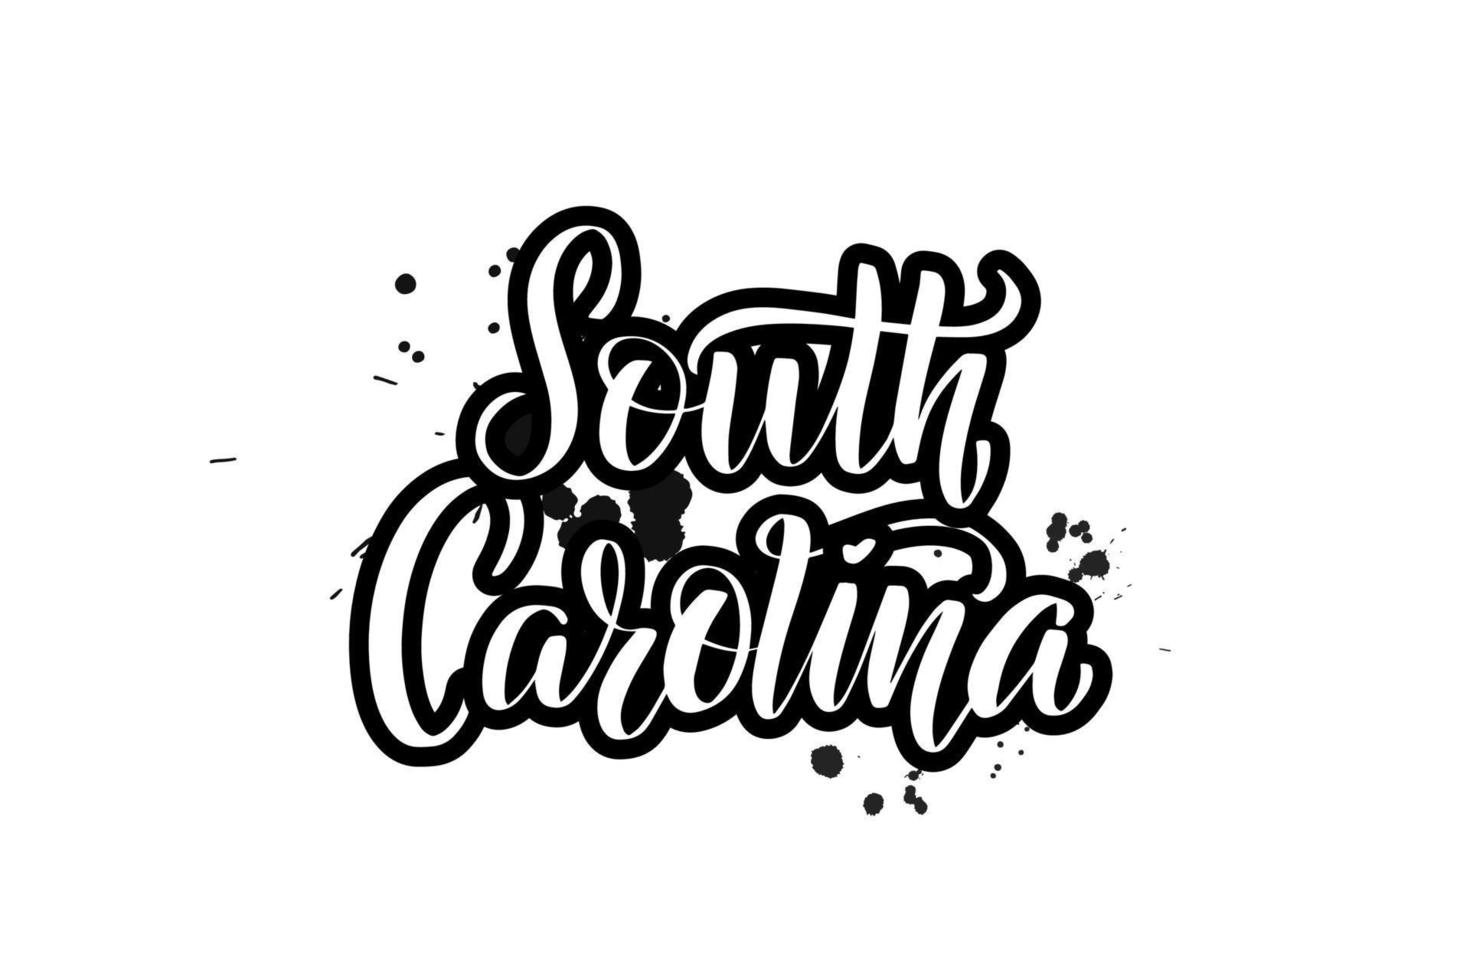 Inspirational handwritten brush lettering South Carolina. Vector calligraphy illustration isolated on white background. Typography for banners, badges, postcard, tshirt, prints, posters.